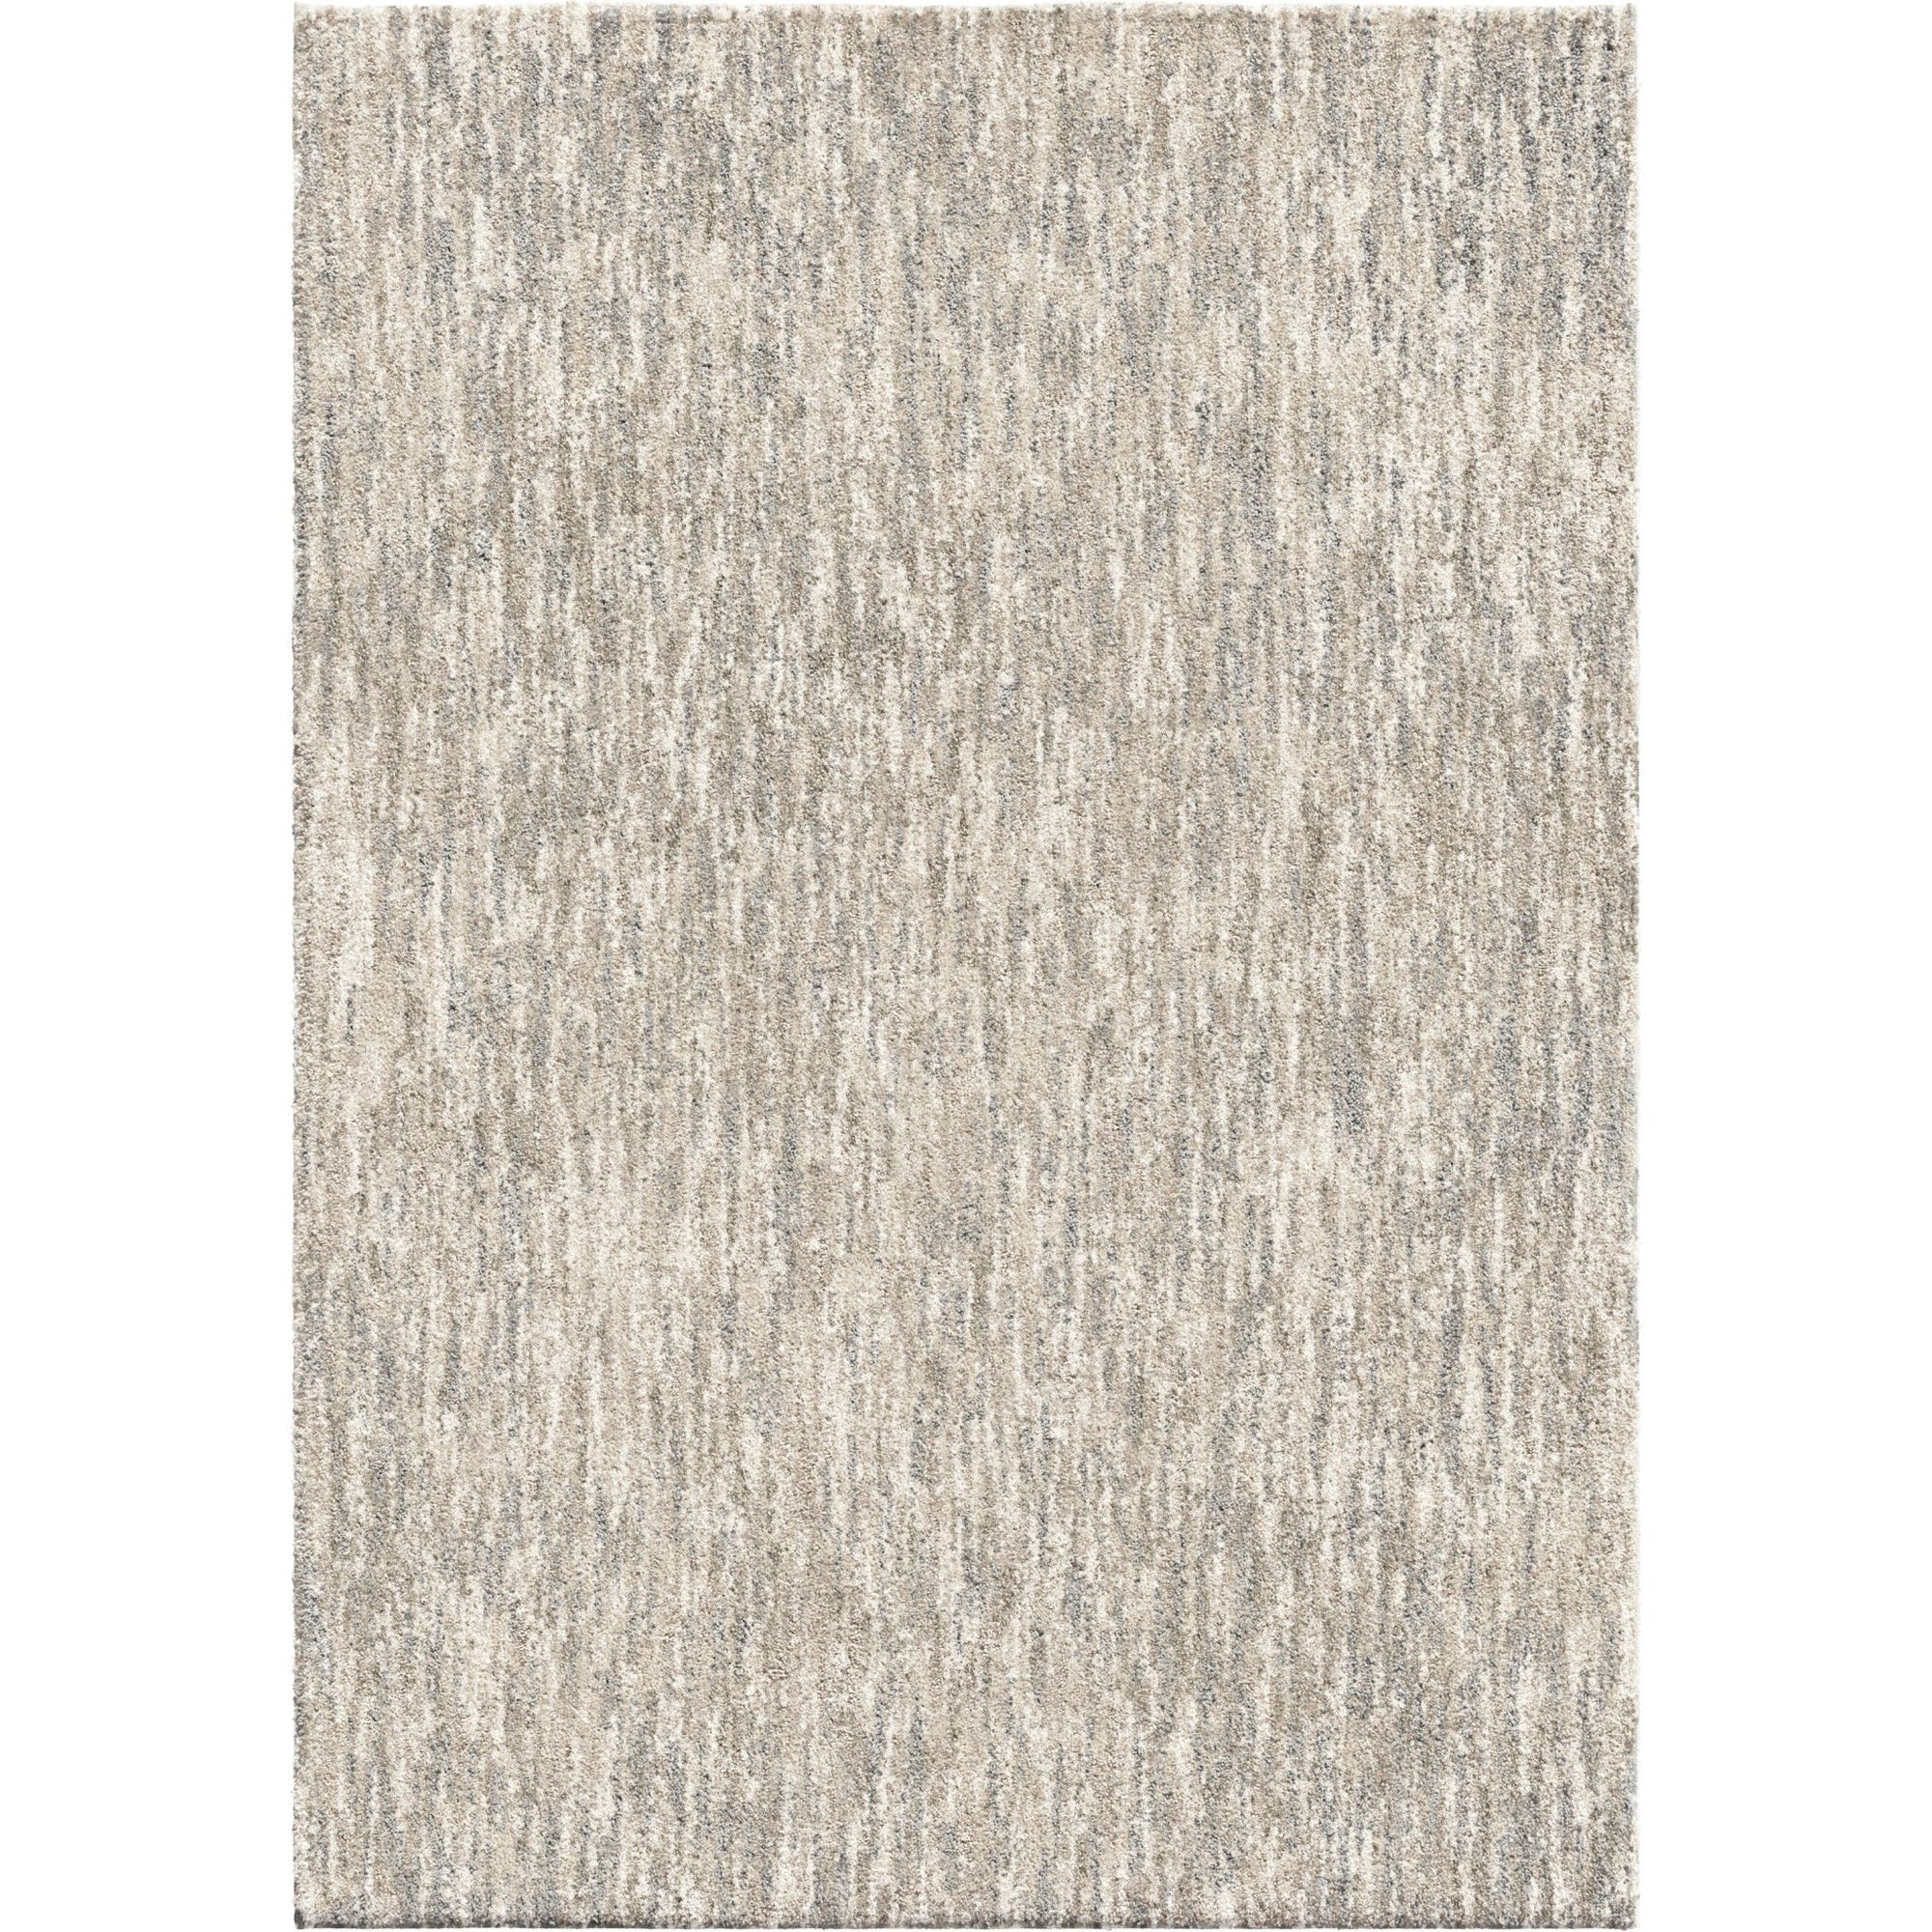 Next Generation 4431 Multi Solid Taupe Grey Rug - Rug & Home